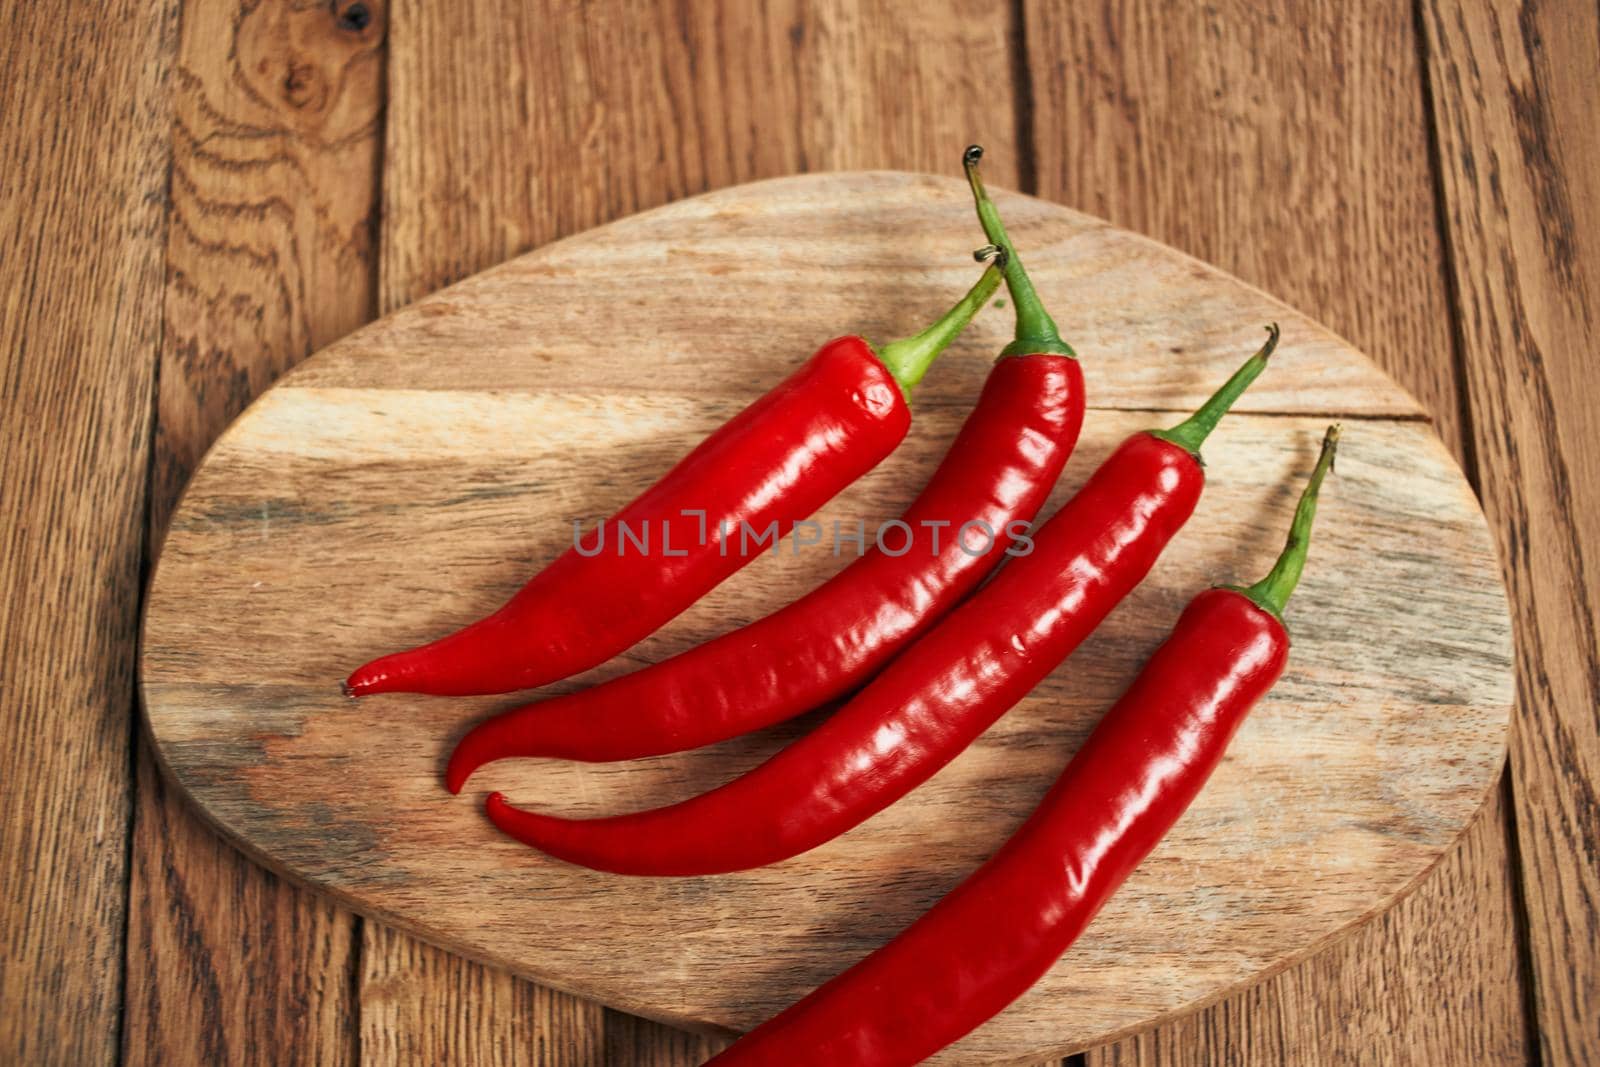 red hot chili peppers on a wooden board kitchen ingredients by Vichizh